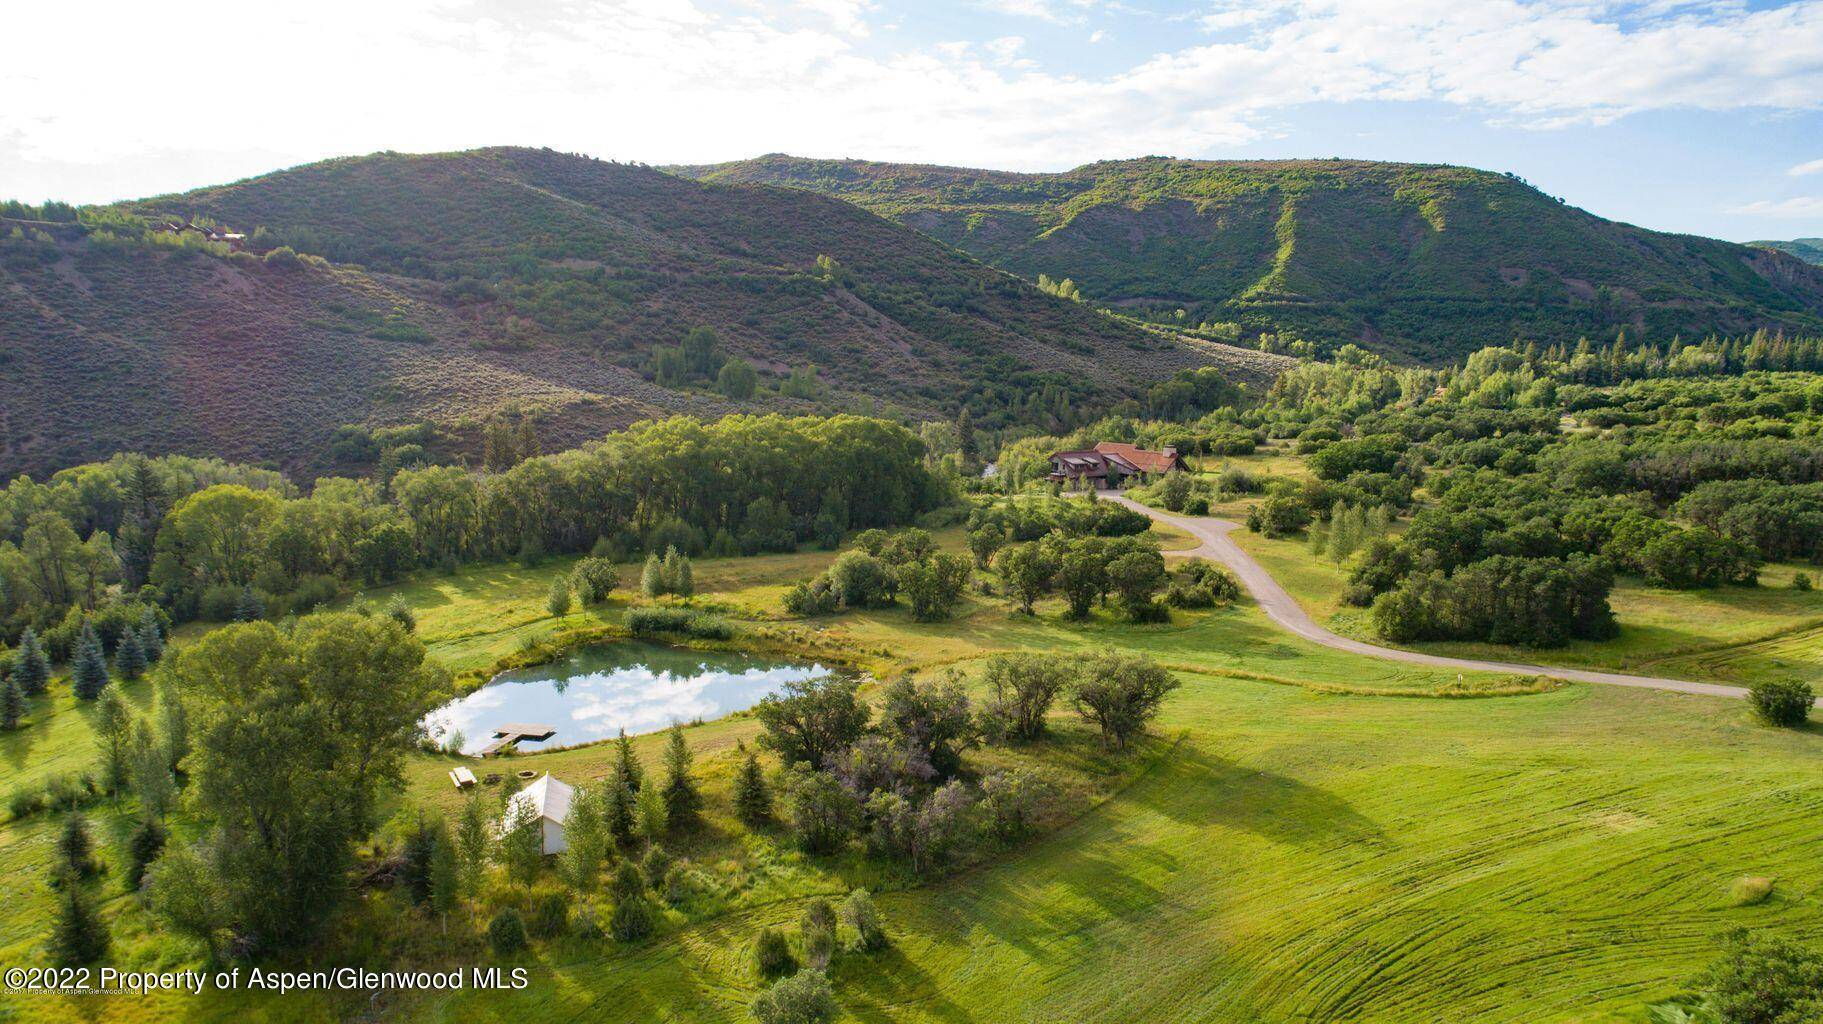 Stretching along the banks of Snowmass Creek, this 75 acre ranch property and spectacular mountain modern home is a slice of heaven on earth.